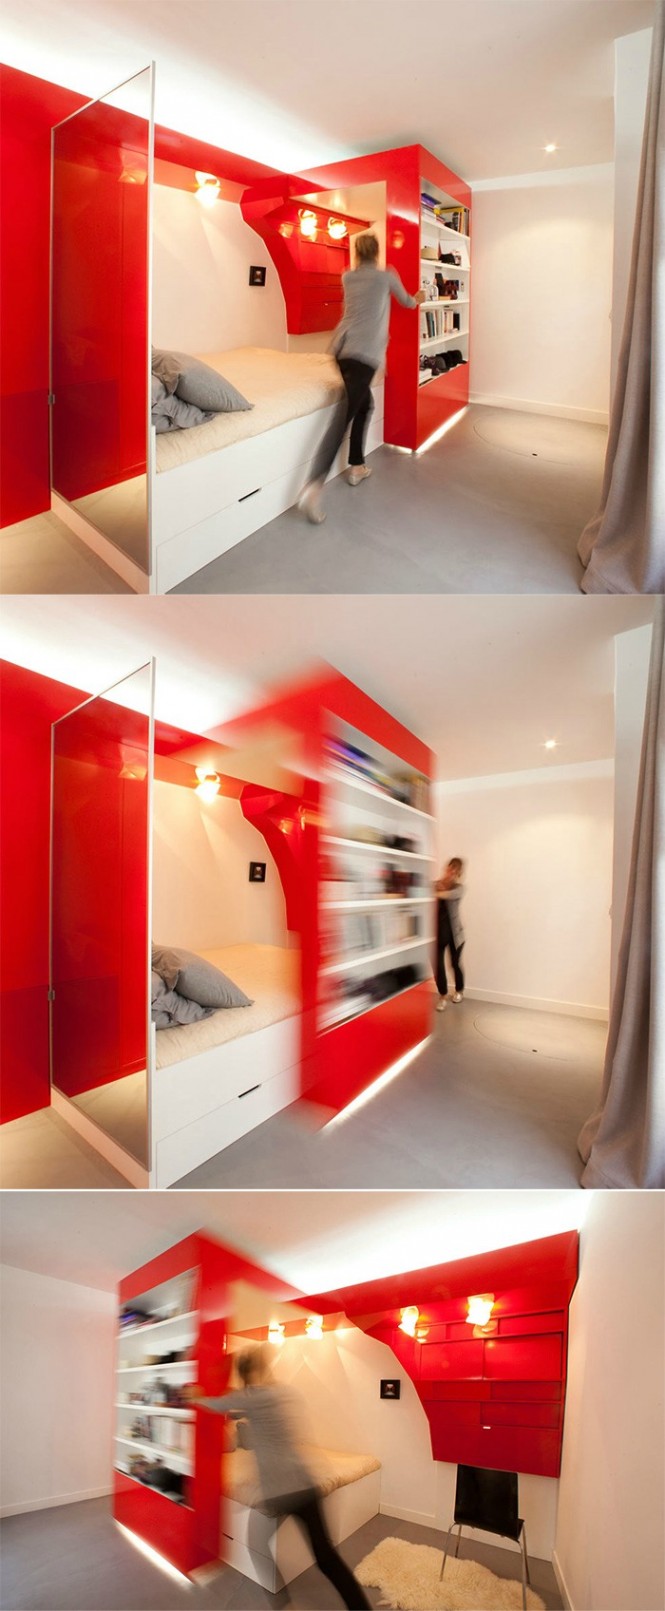 Design By Coudamy Design. This Parisian firm which designs everything from sets to architecture to furniture, seeks to redefine design and "give posture to an aesthetic diversity."This red and white bed is attached to a matching shelf display.  We think this would be especially effective as a space saver or even for a child's bedroom.